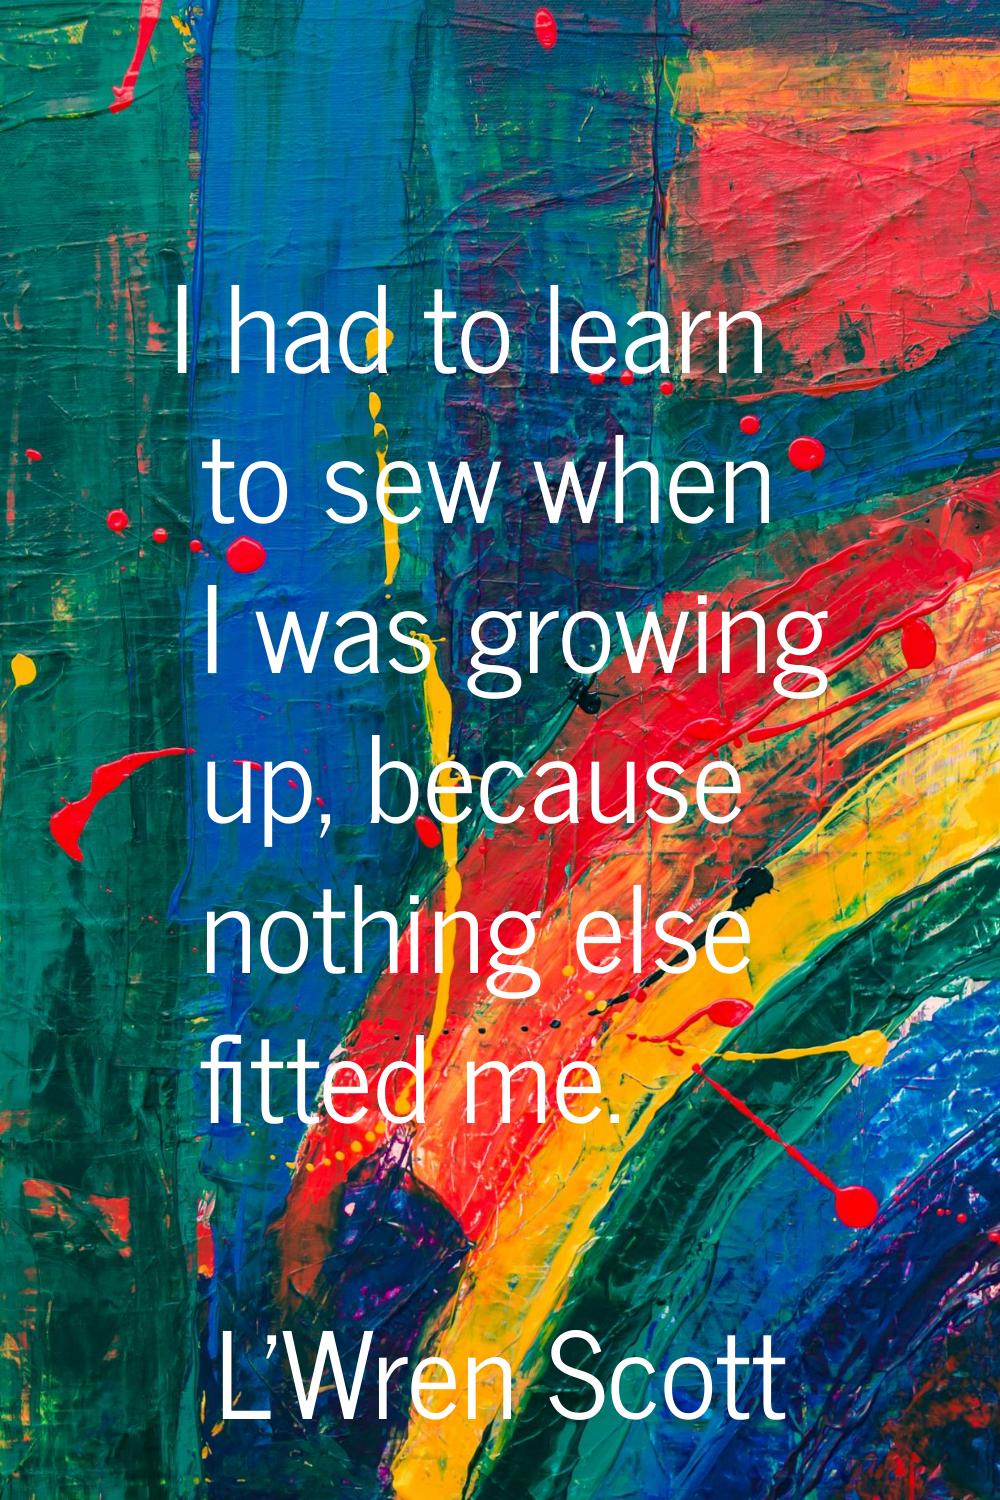 I had to learn to sew when I was growing up, because nothing else fitted me.